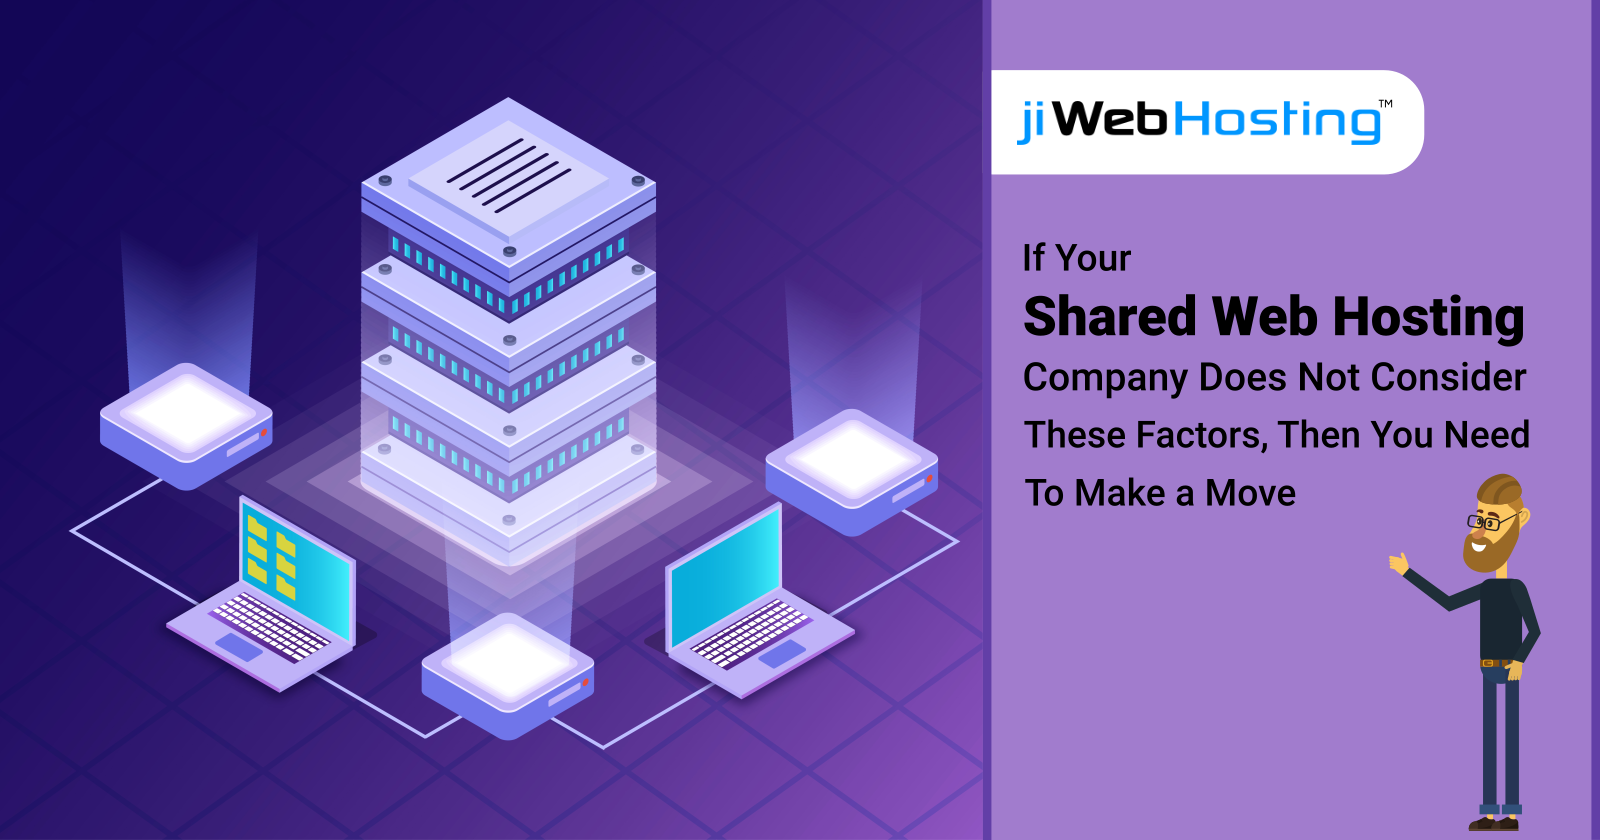 If Your Shared Web Hosting Company Does Not Consider These Factors, Then You Need To Make a Move